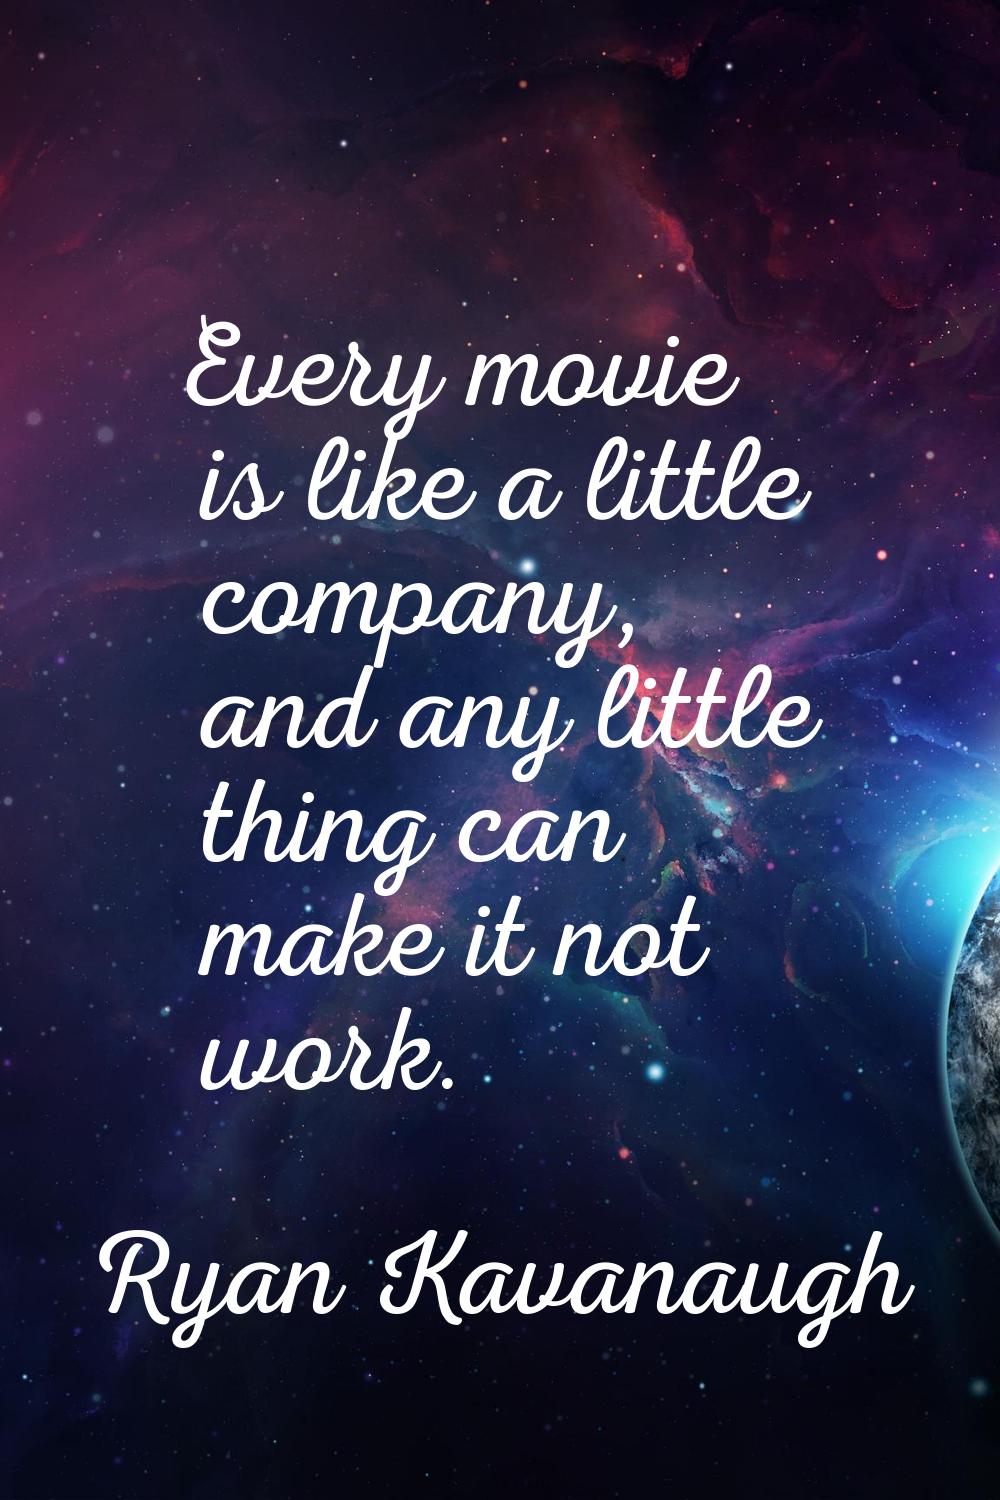 Every movie is like a little company, and any little thing can make it not work.